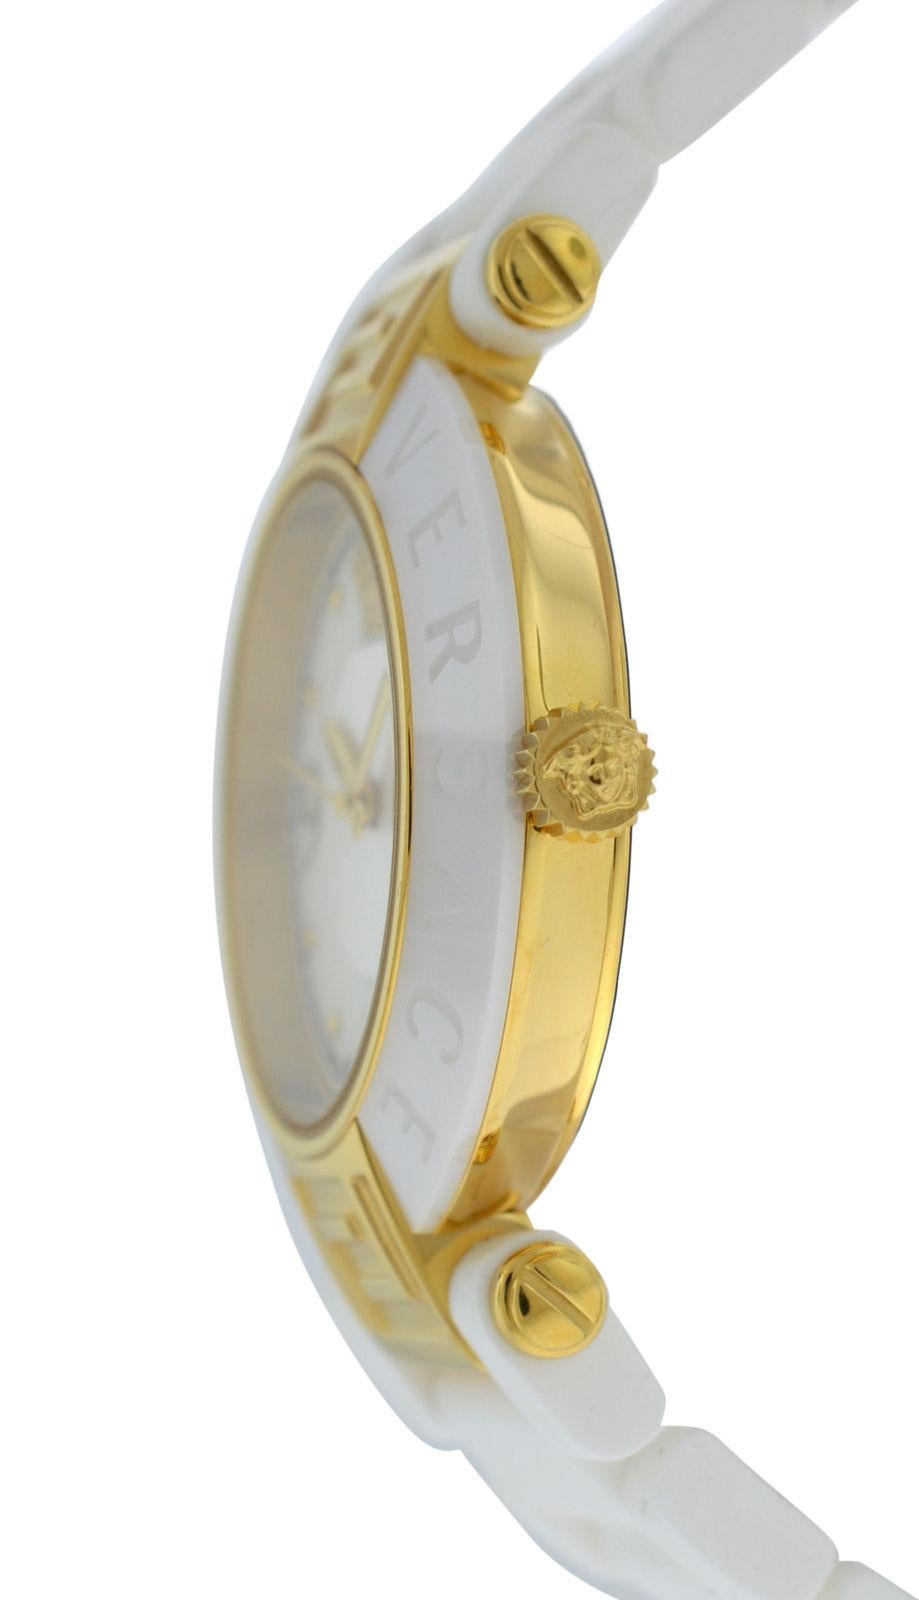 Brand	Versace
Model	Reve 92QCP1D497 S001
Gender	Ladies
Condition	New
Movement	Swiss Quartz
Case Material	Ceramic & steel gold tone
Bracelet / Strap Material	
Rubber / Silicone

Clasp / Buckle Material	
Gold tone stainless steel

Clasp Type	Butterfly